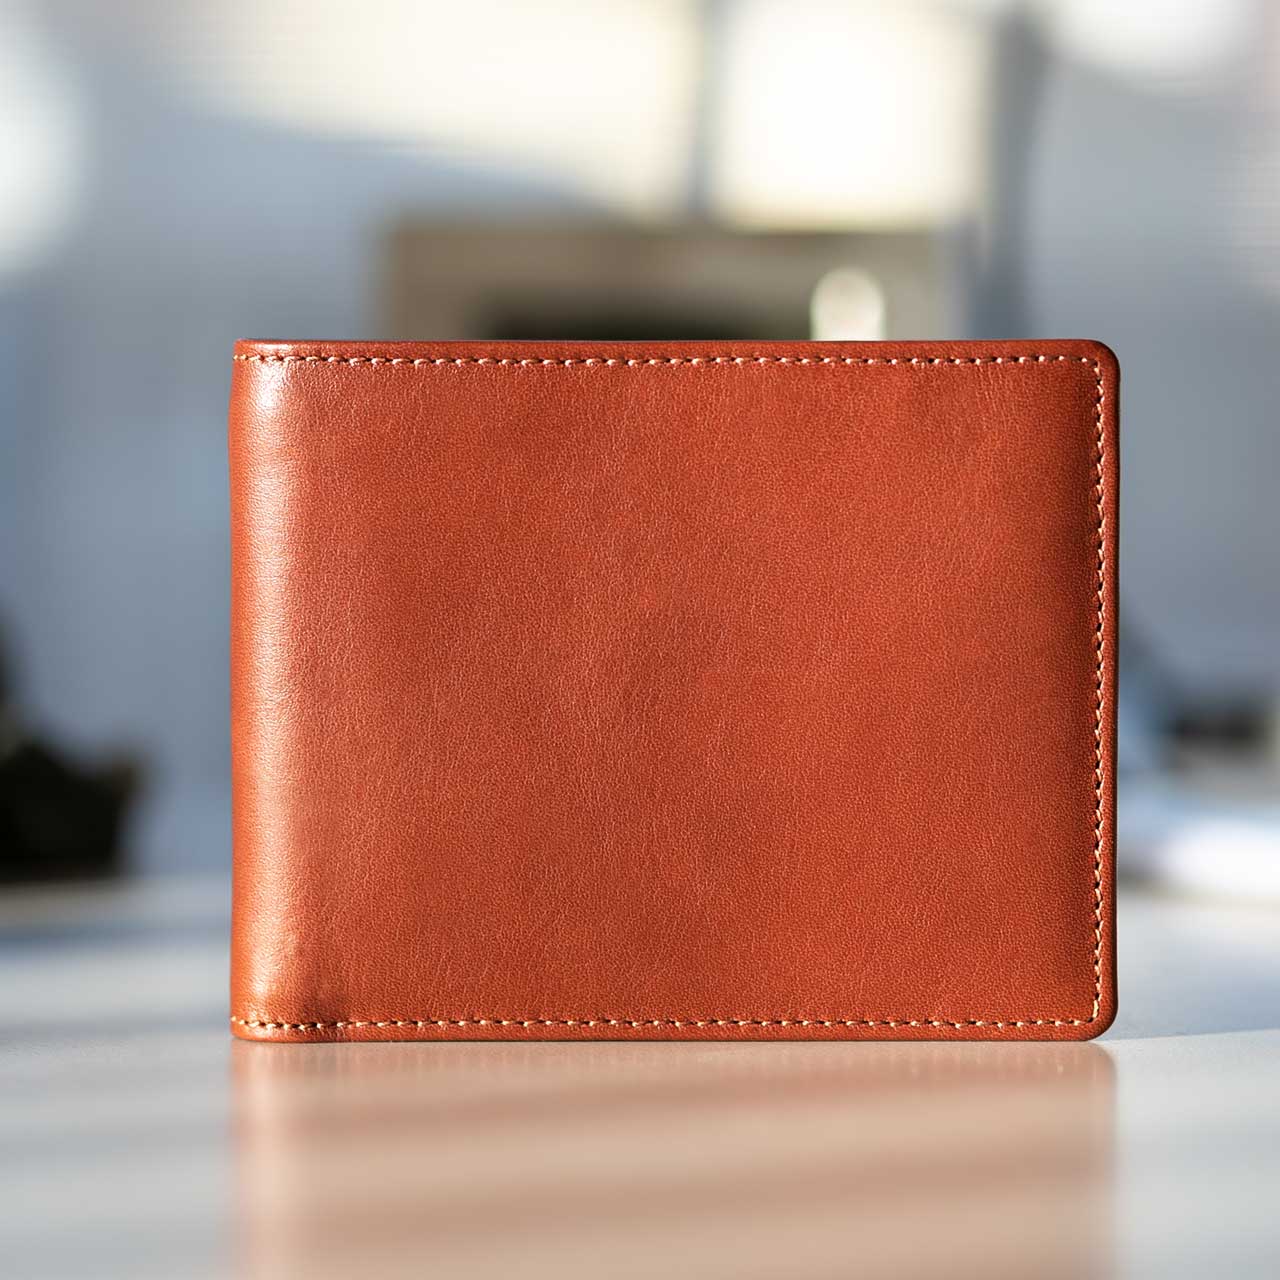 DiLoro Men's Bifold Leather Wallet Lugano Collection Bugatti Tan - Top Quality Leather and Expert Workmanship